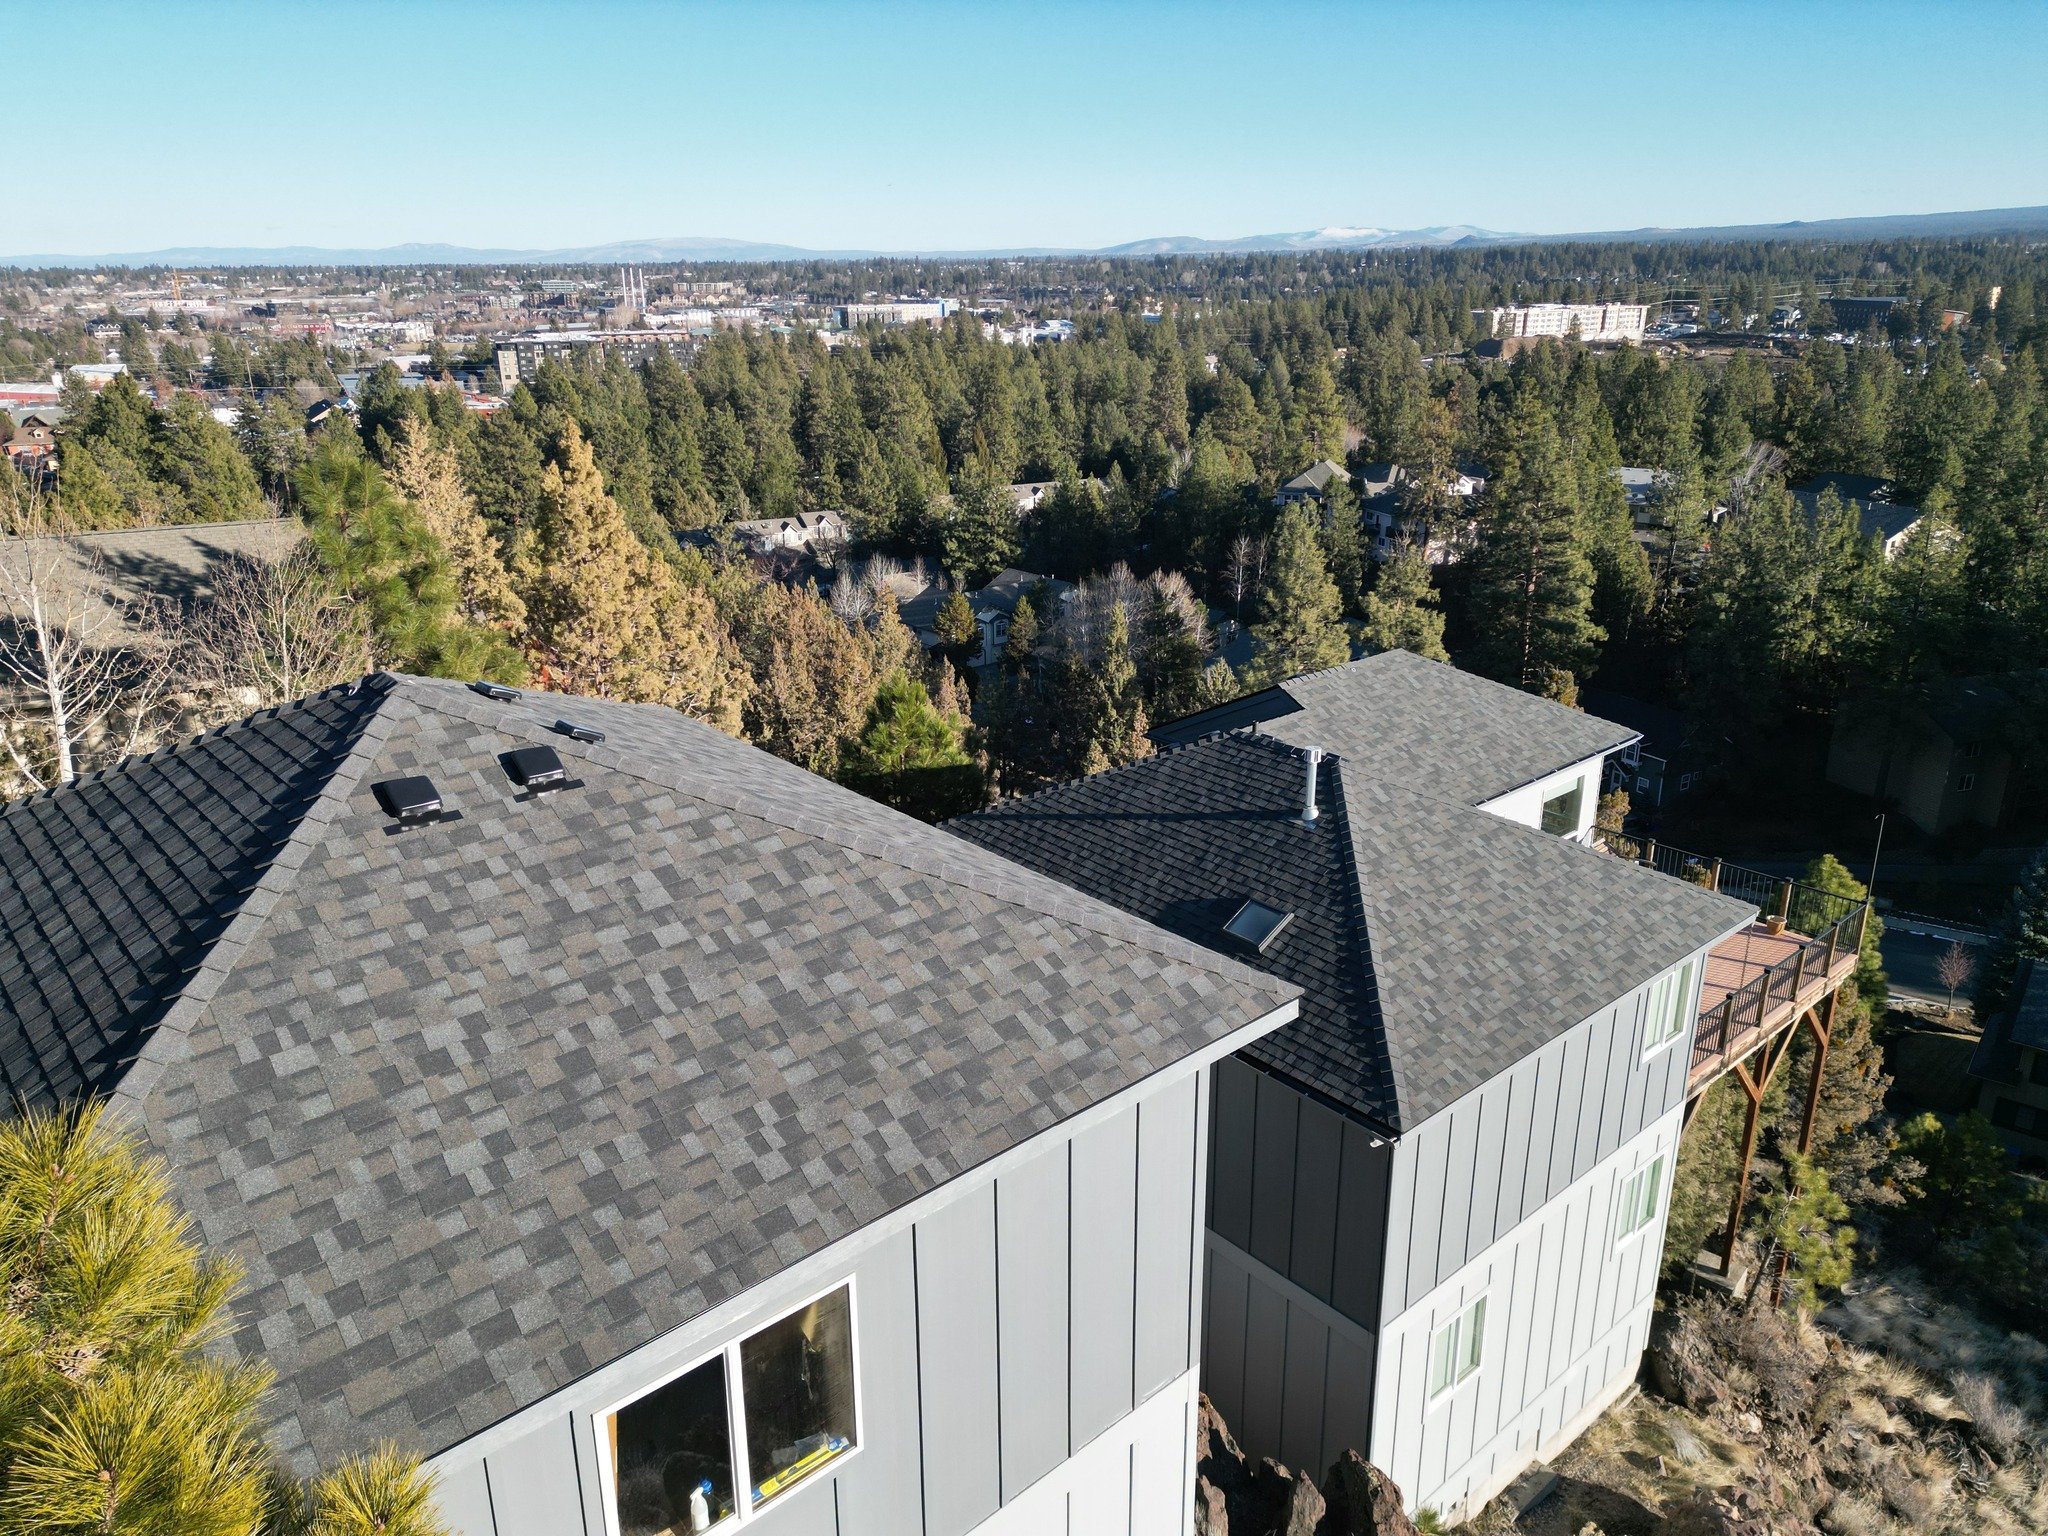 Local Roots, Local Commitment: We're not just a roofing company; we're part of the Bend, OR community. That's why we prioritize the satisfaction of our neighbors and customers above all else.